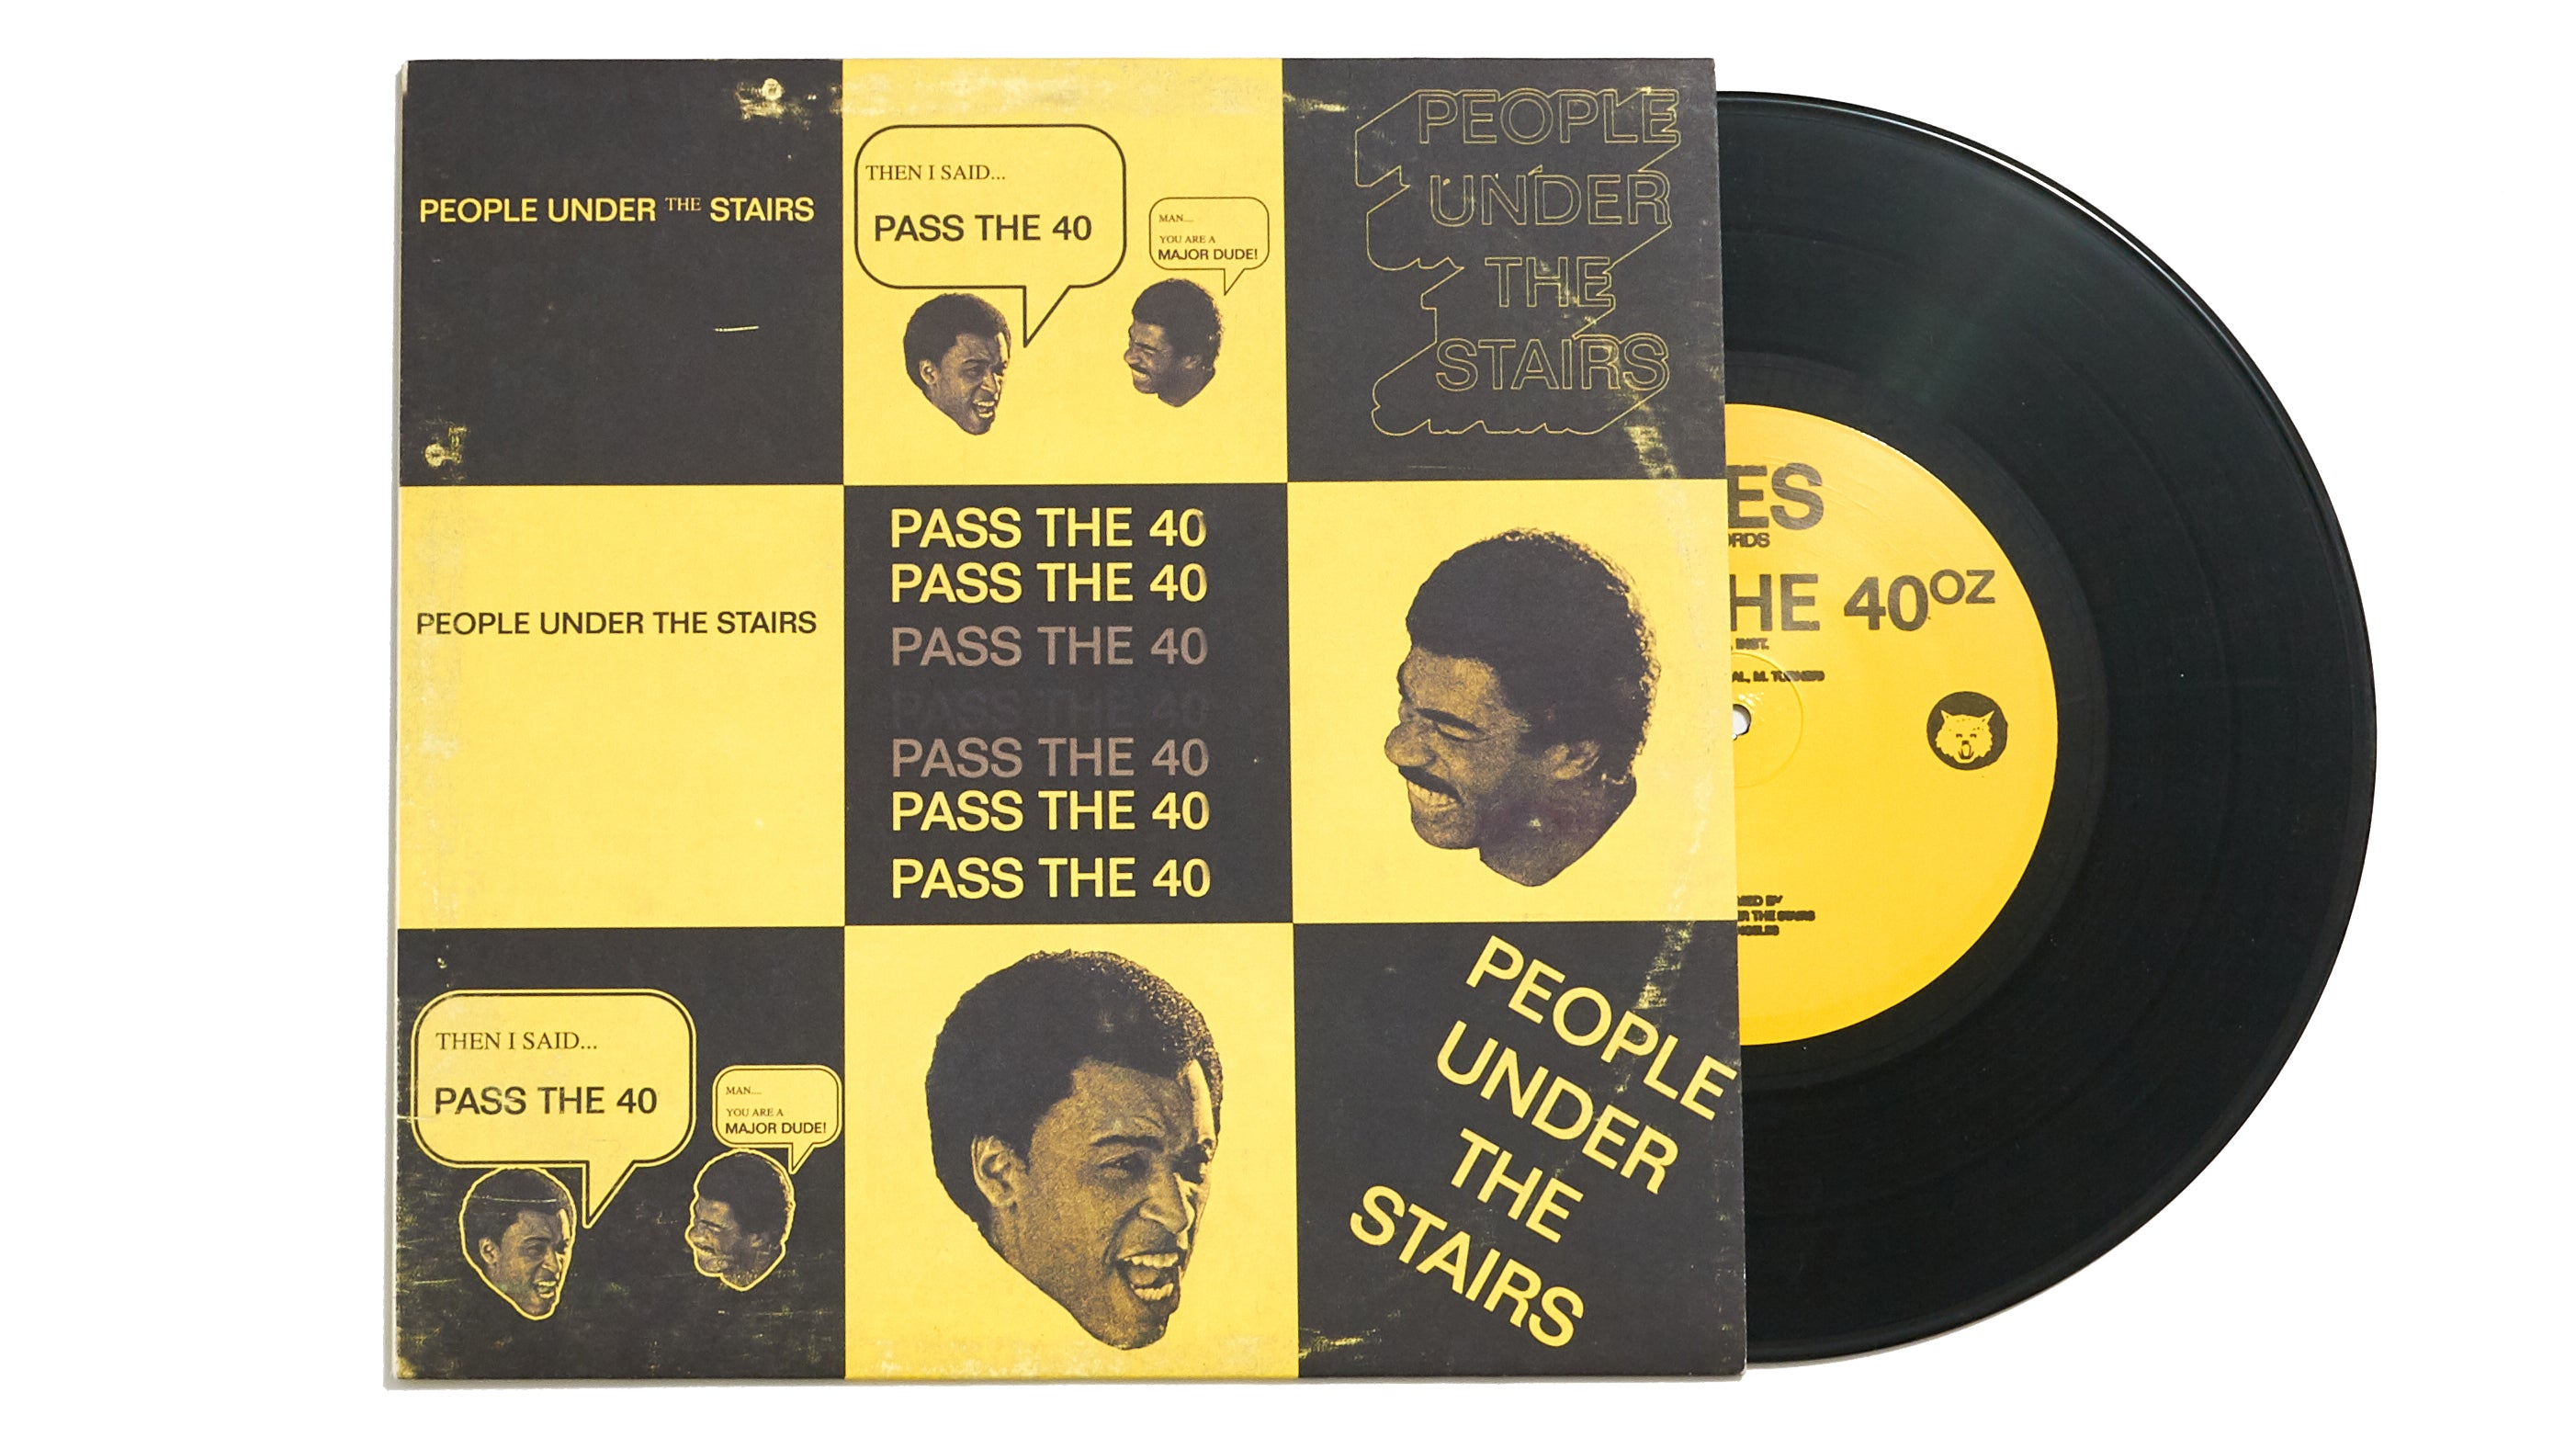 People Under The Stairs "Pass The 40" (12")